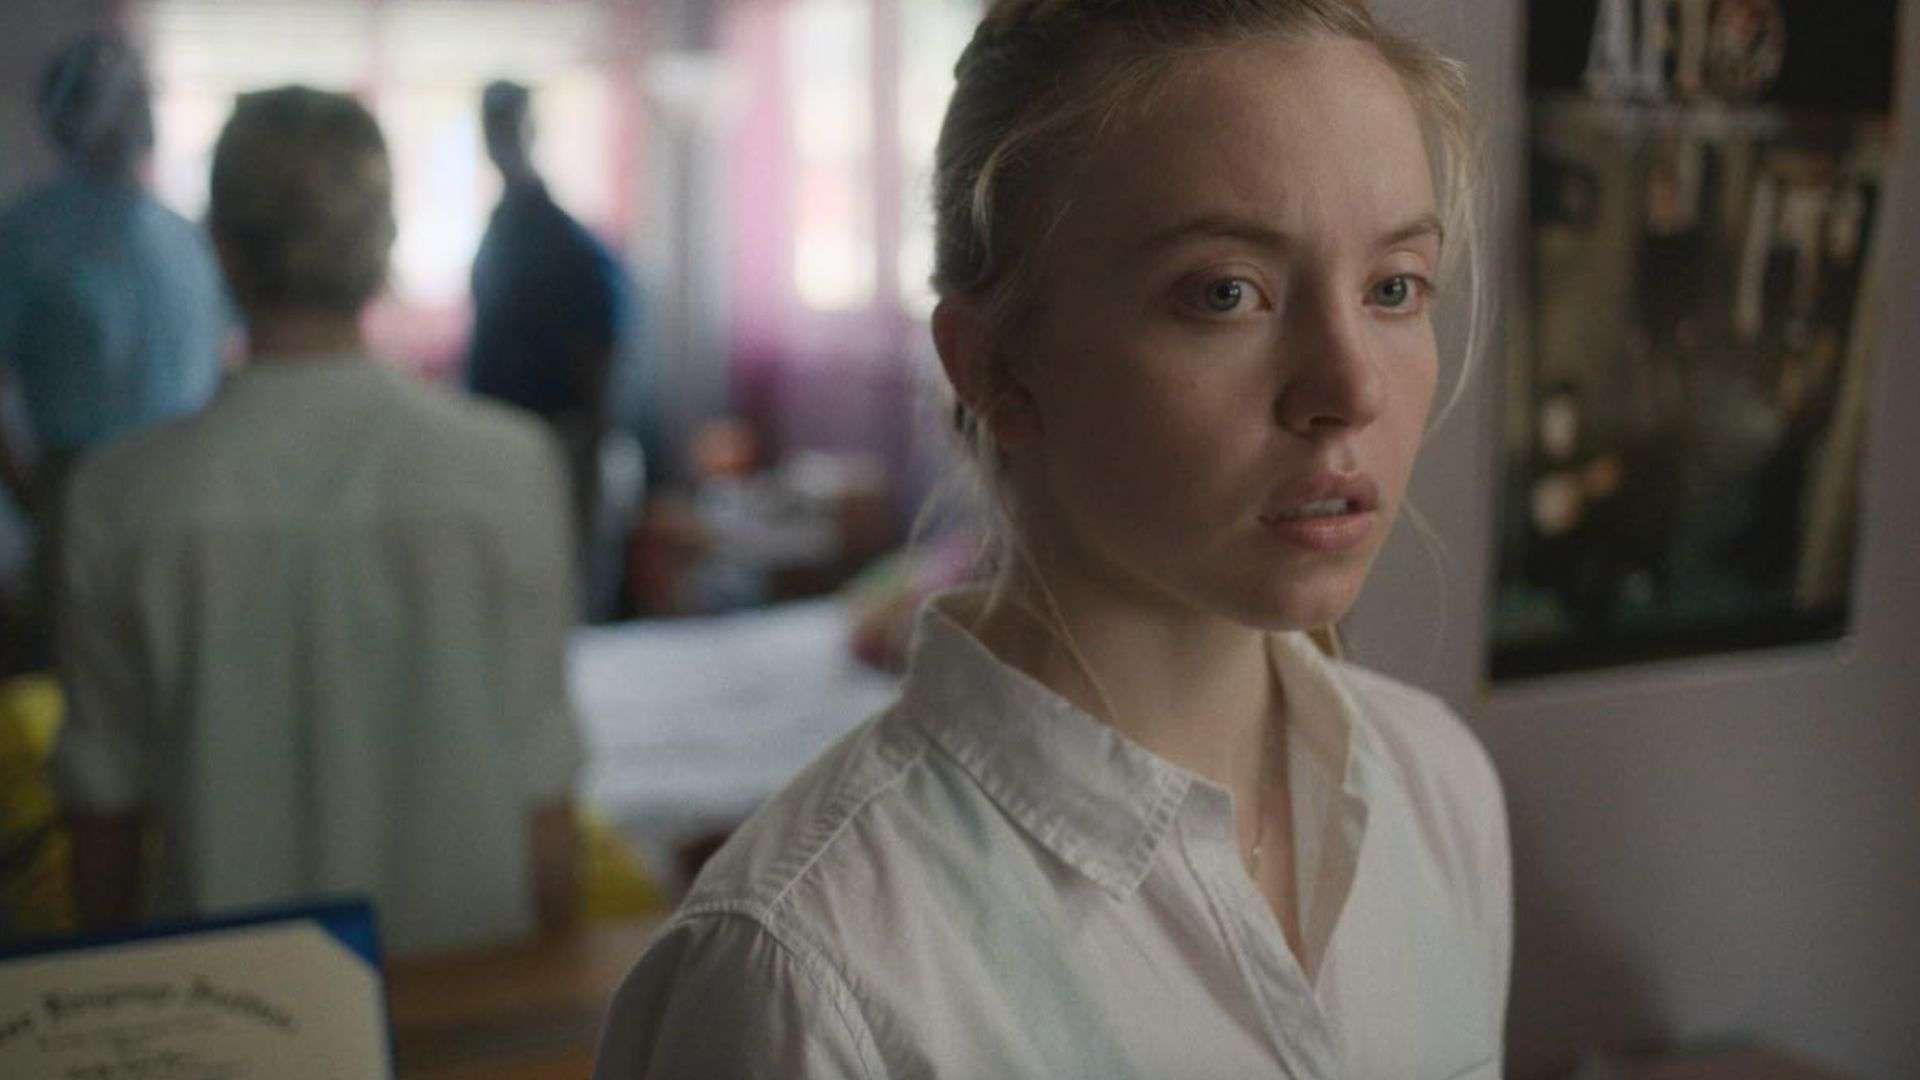 Sydney Sweeney in a white collared shirt in this image from Apple TV Plus.